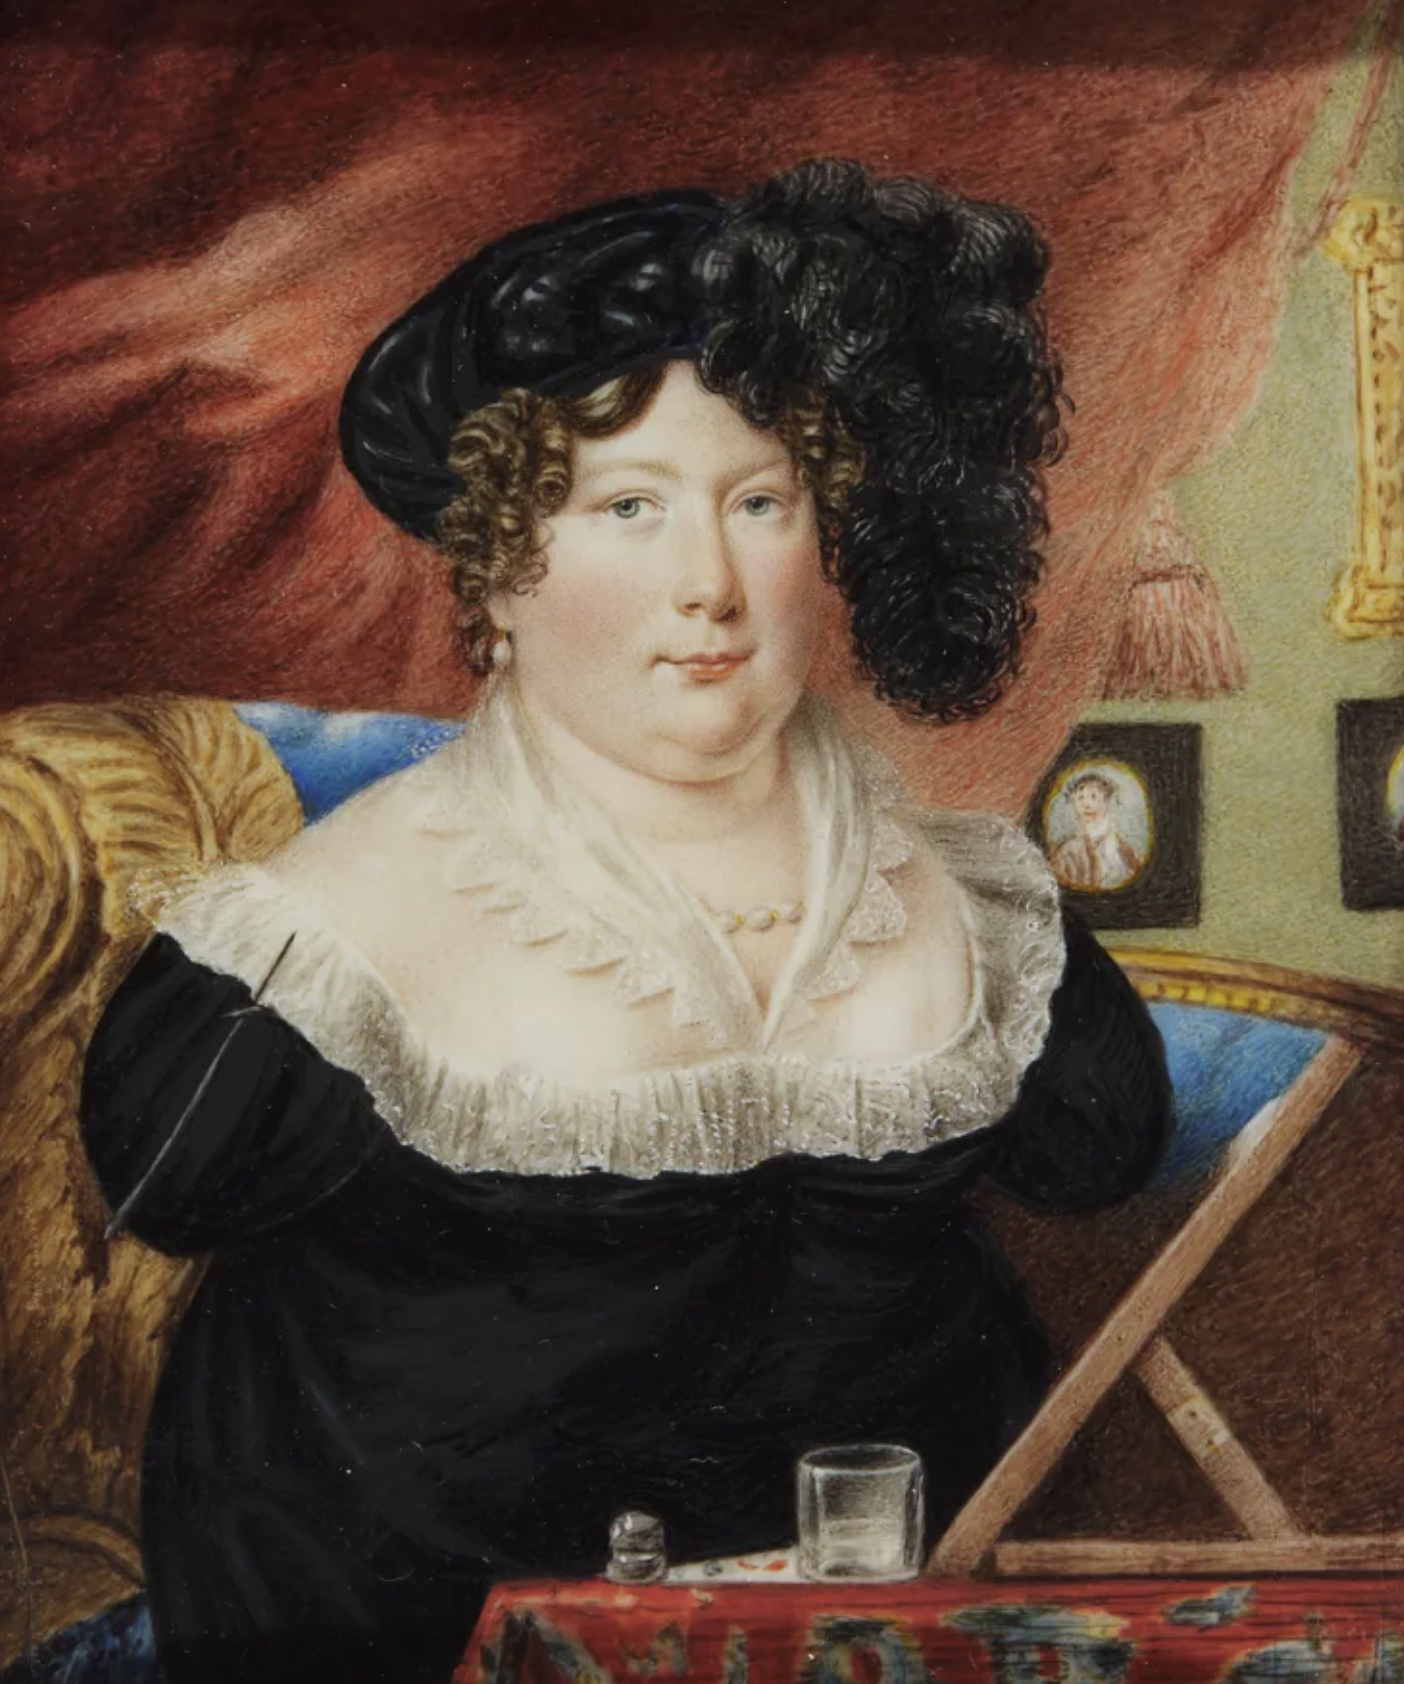 Self portrait of Sarah Biffen wearing a black dress with a collar of white ruffles.